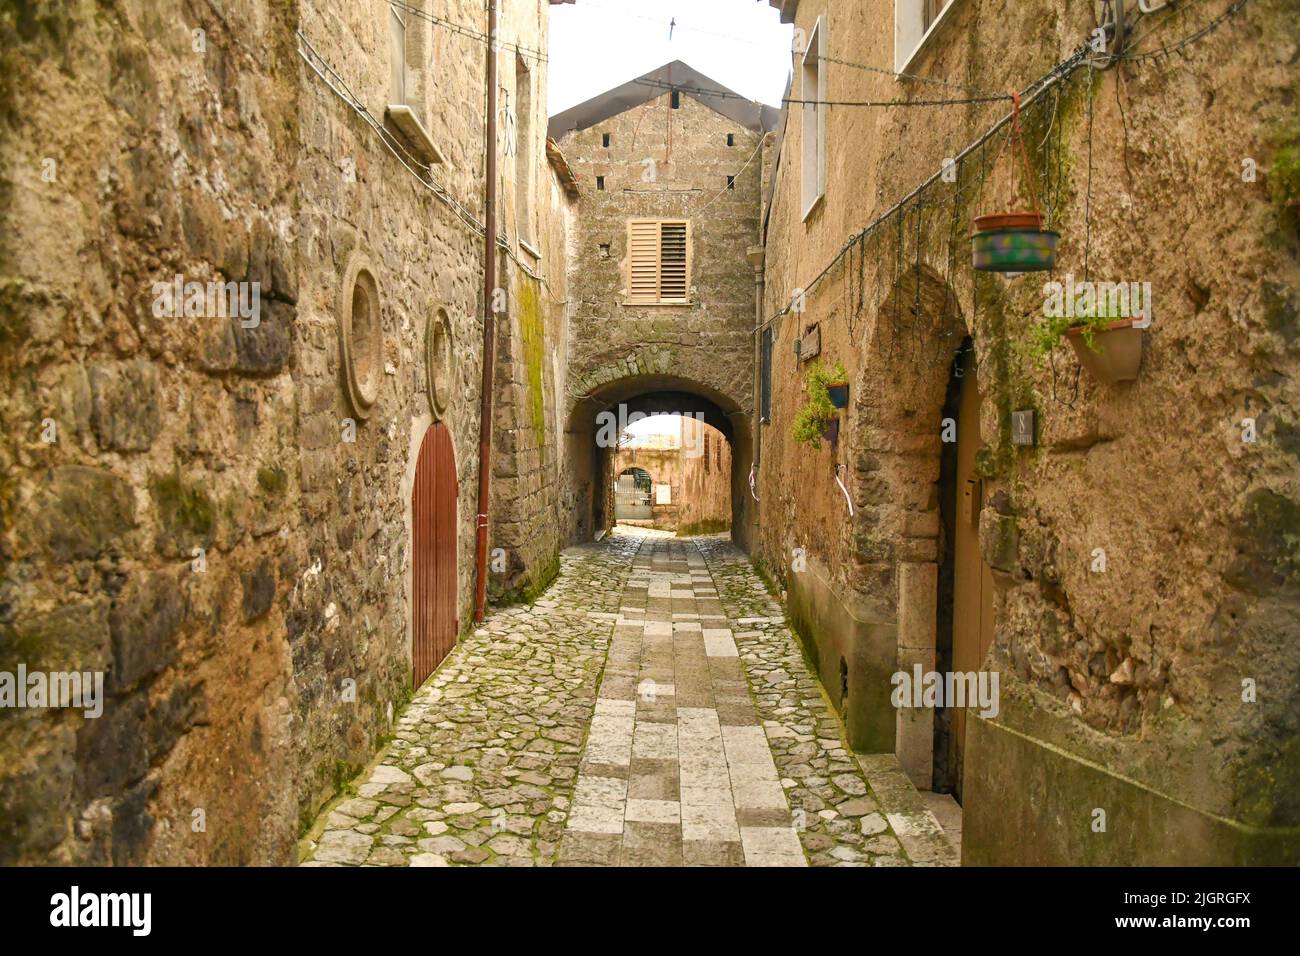 A narrow street among the stone houses of an old district of the city of Caserta Stock Photo